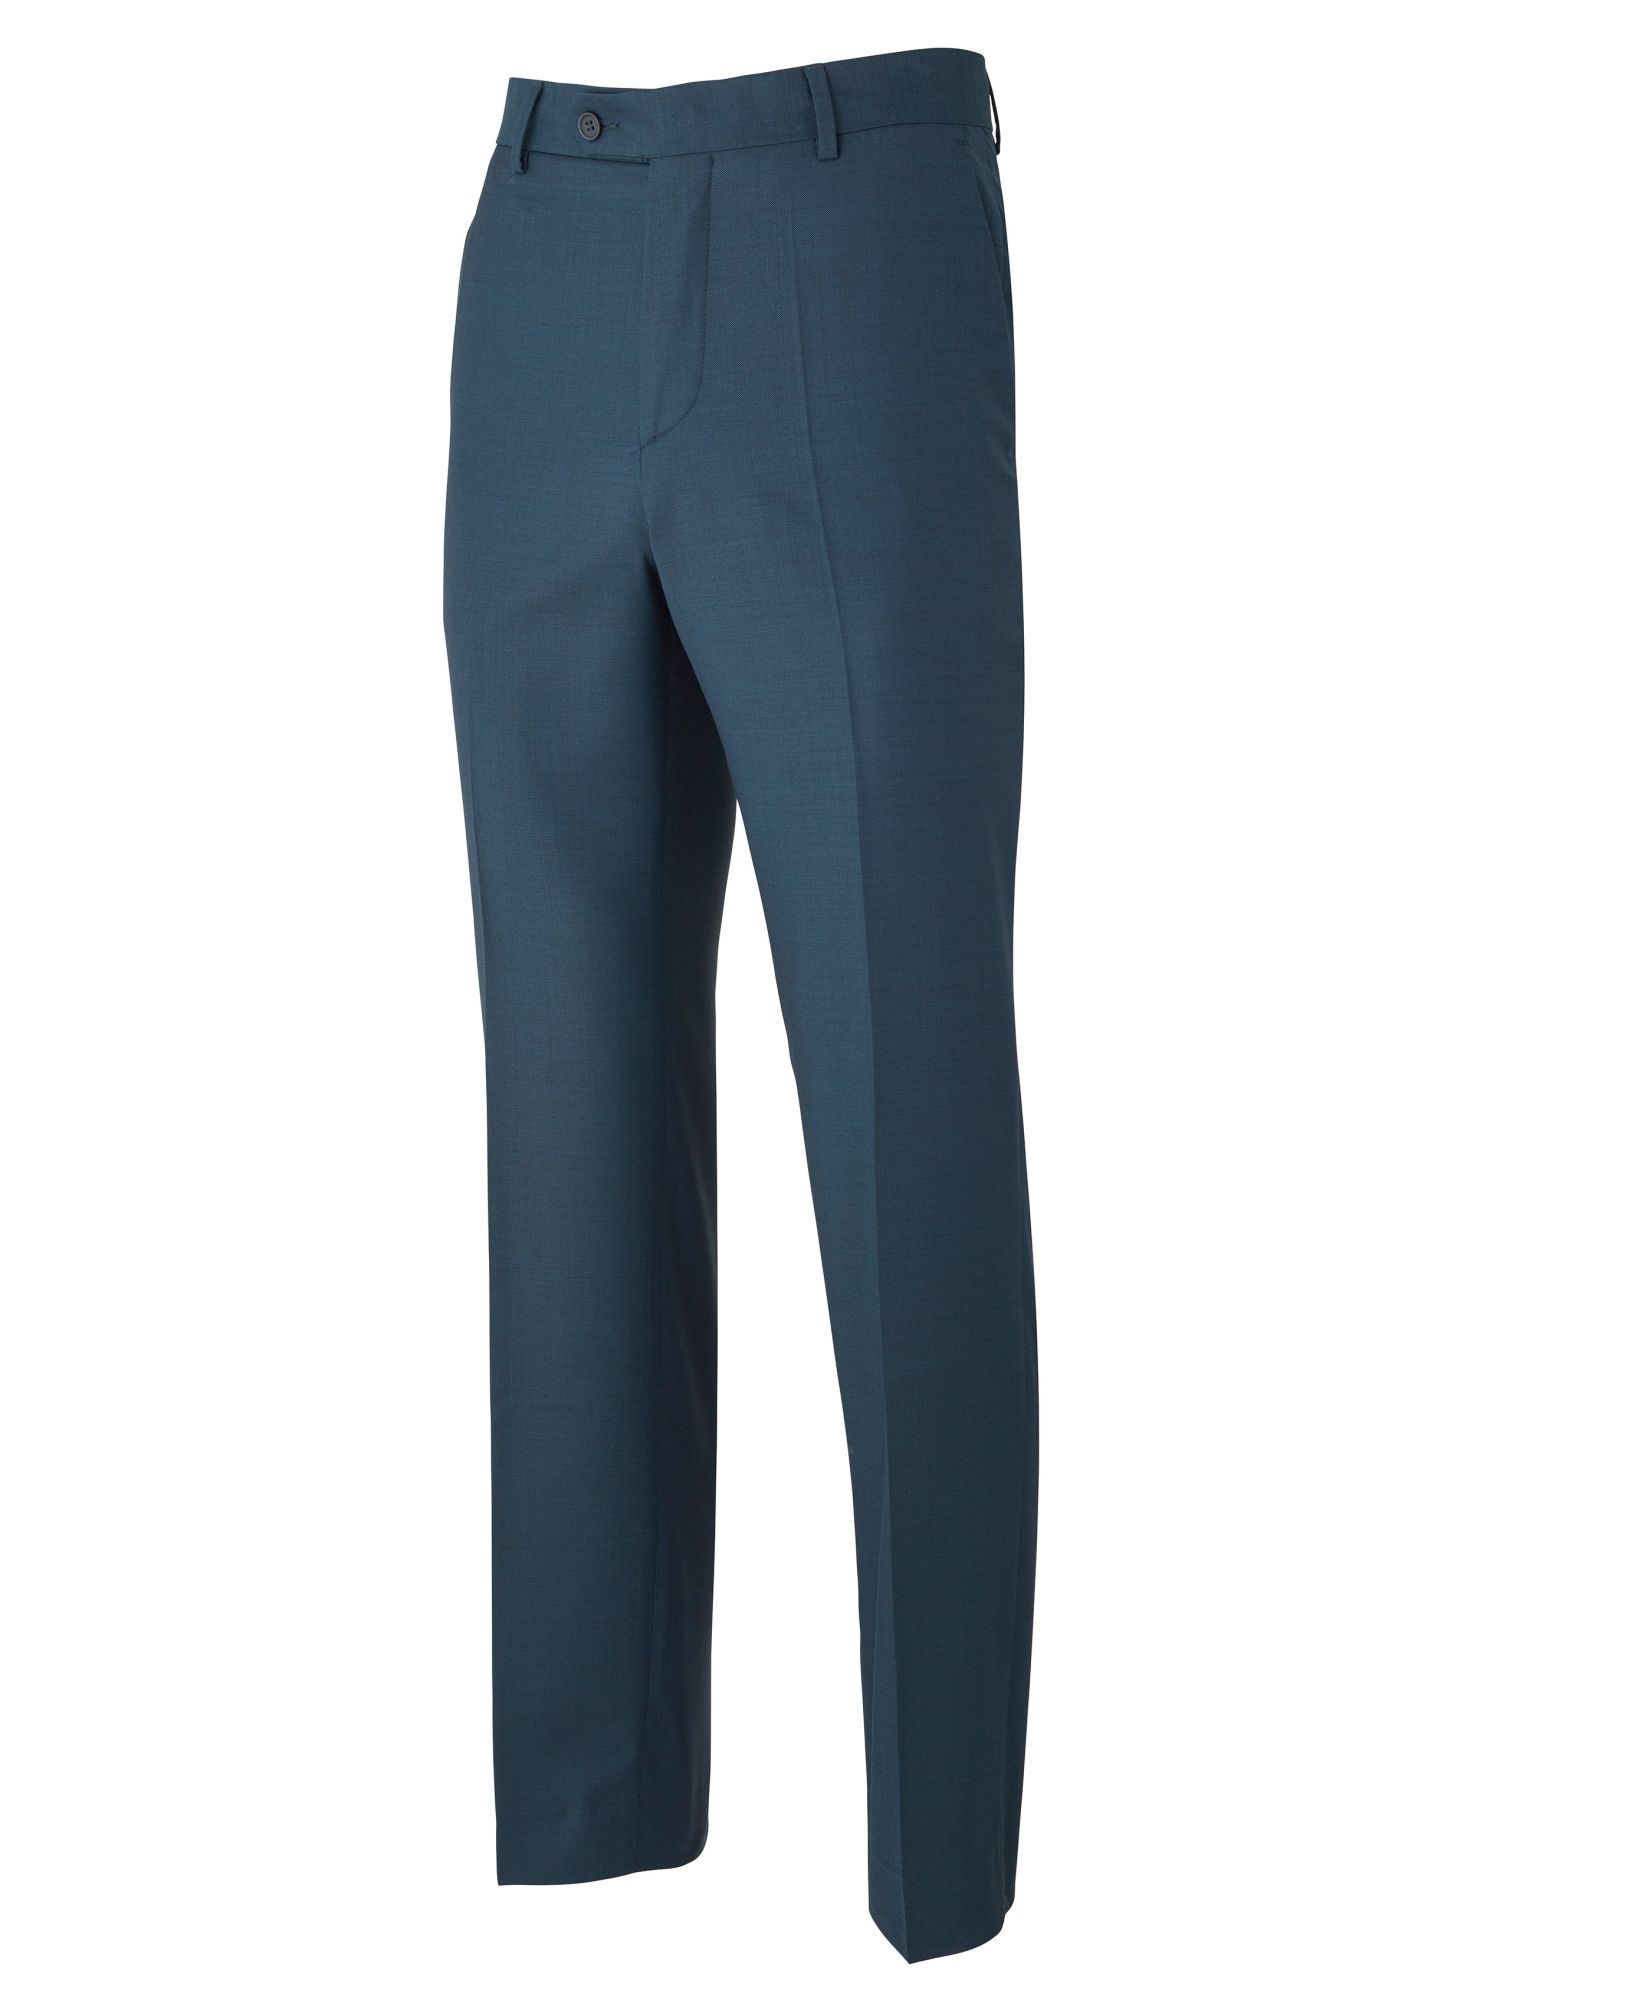 Petrol Blue Wool-Blend Tailored Suit Trousers 38